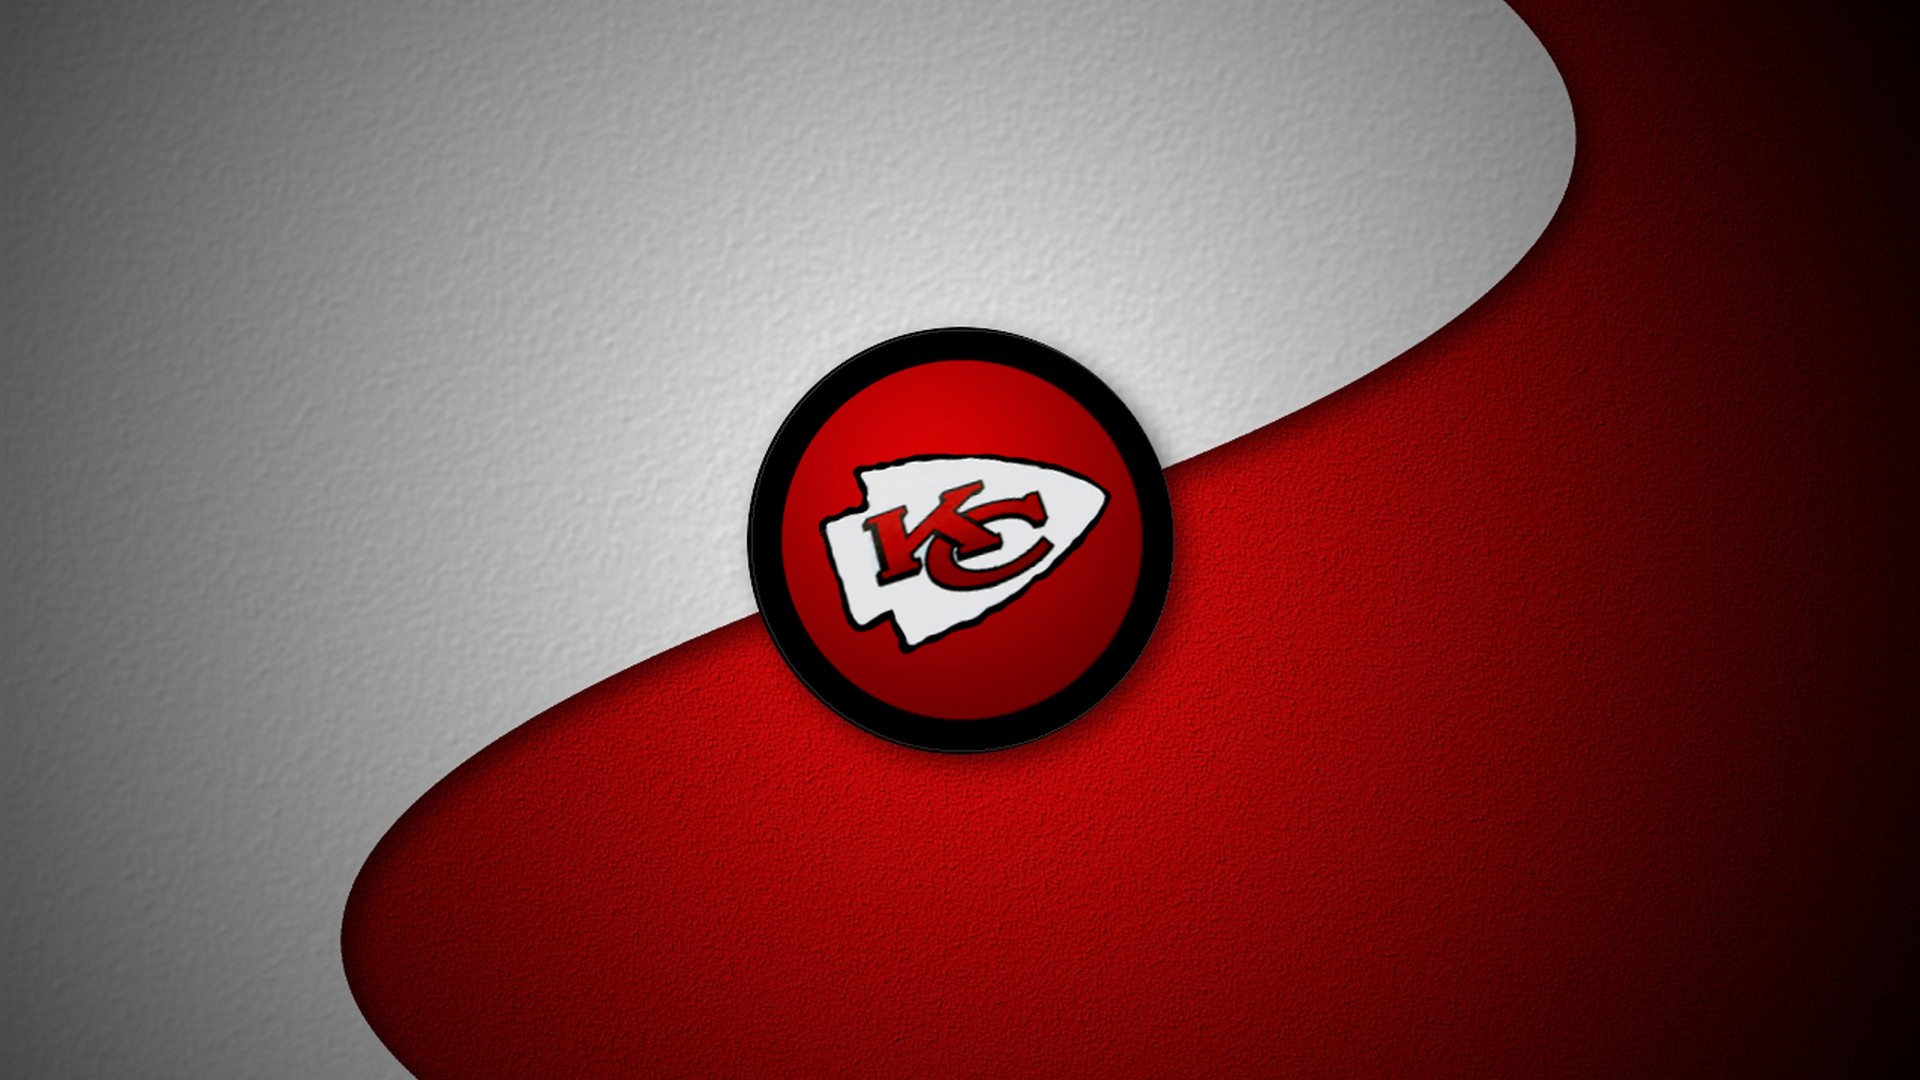 Kansas City Chiefs Desktop Wallpapers With Resolution 1920X1080 pixel. You can make this wallpaper for your Mac or Windows Desktop Background, iPhone, Android or Tablet and another Smartphone device for free